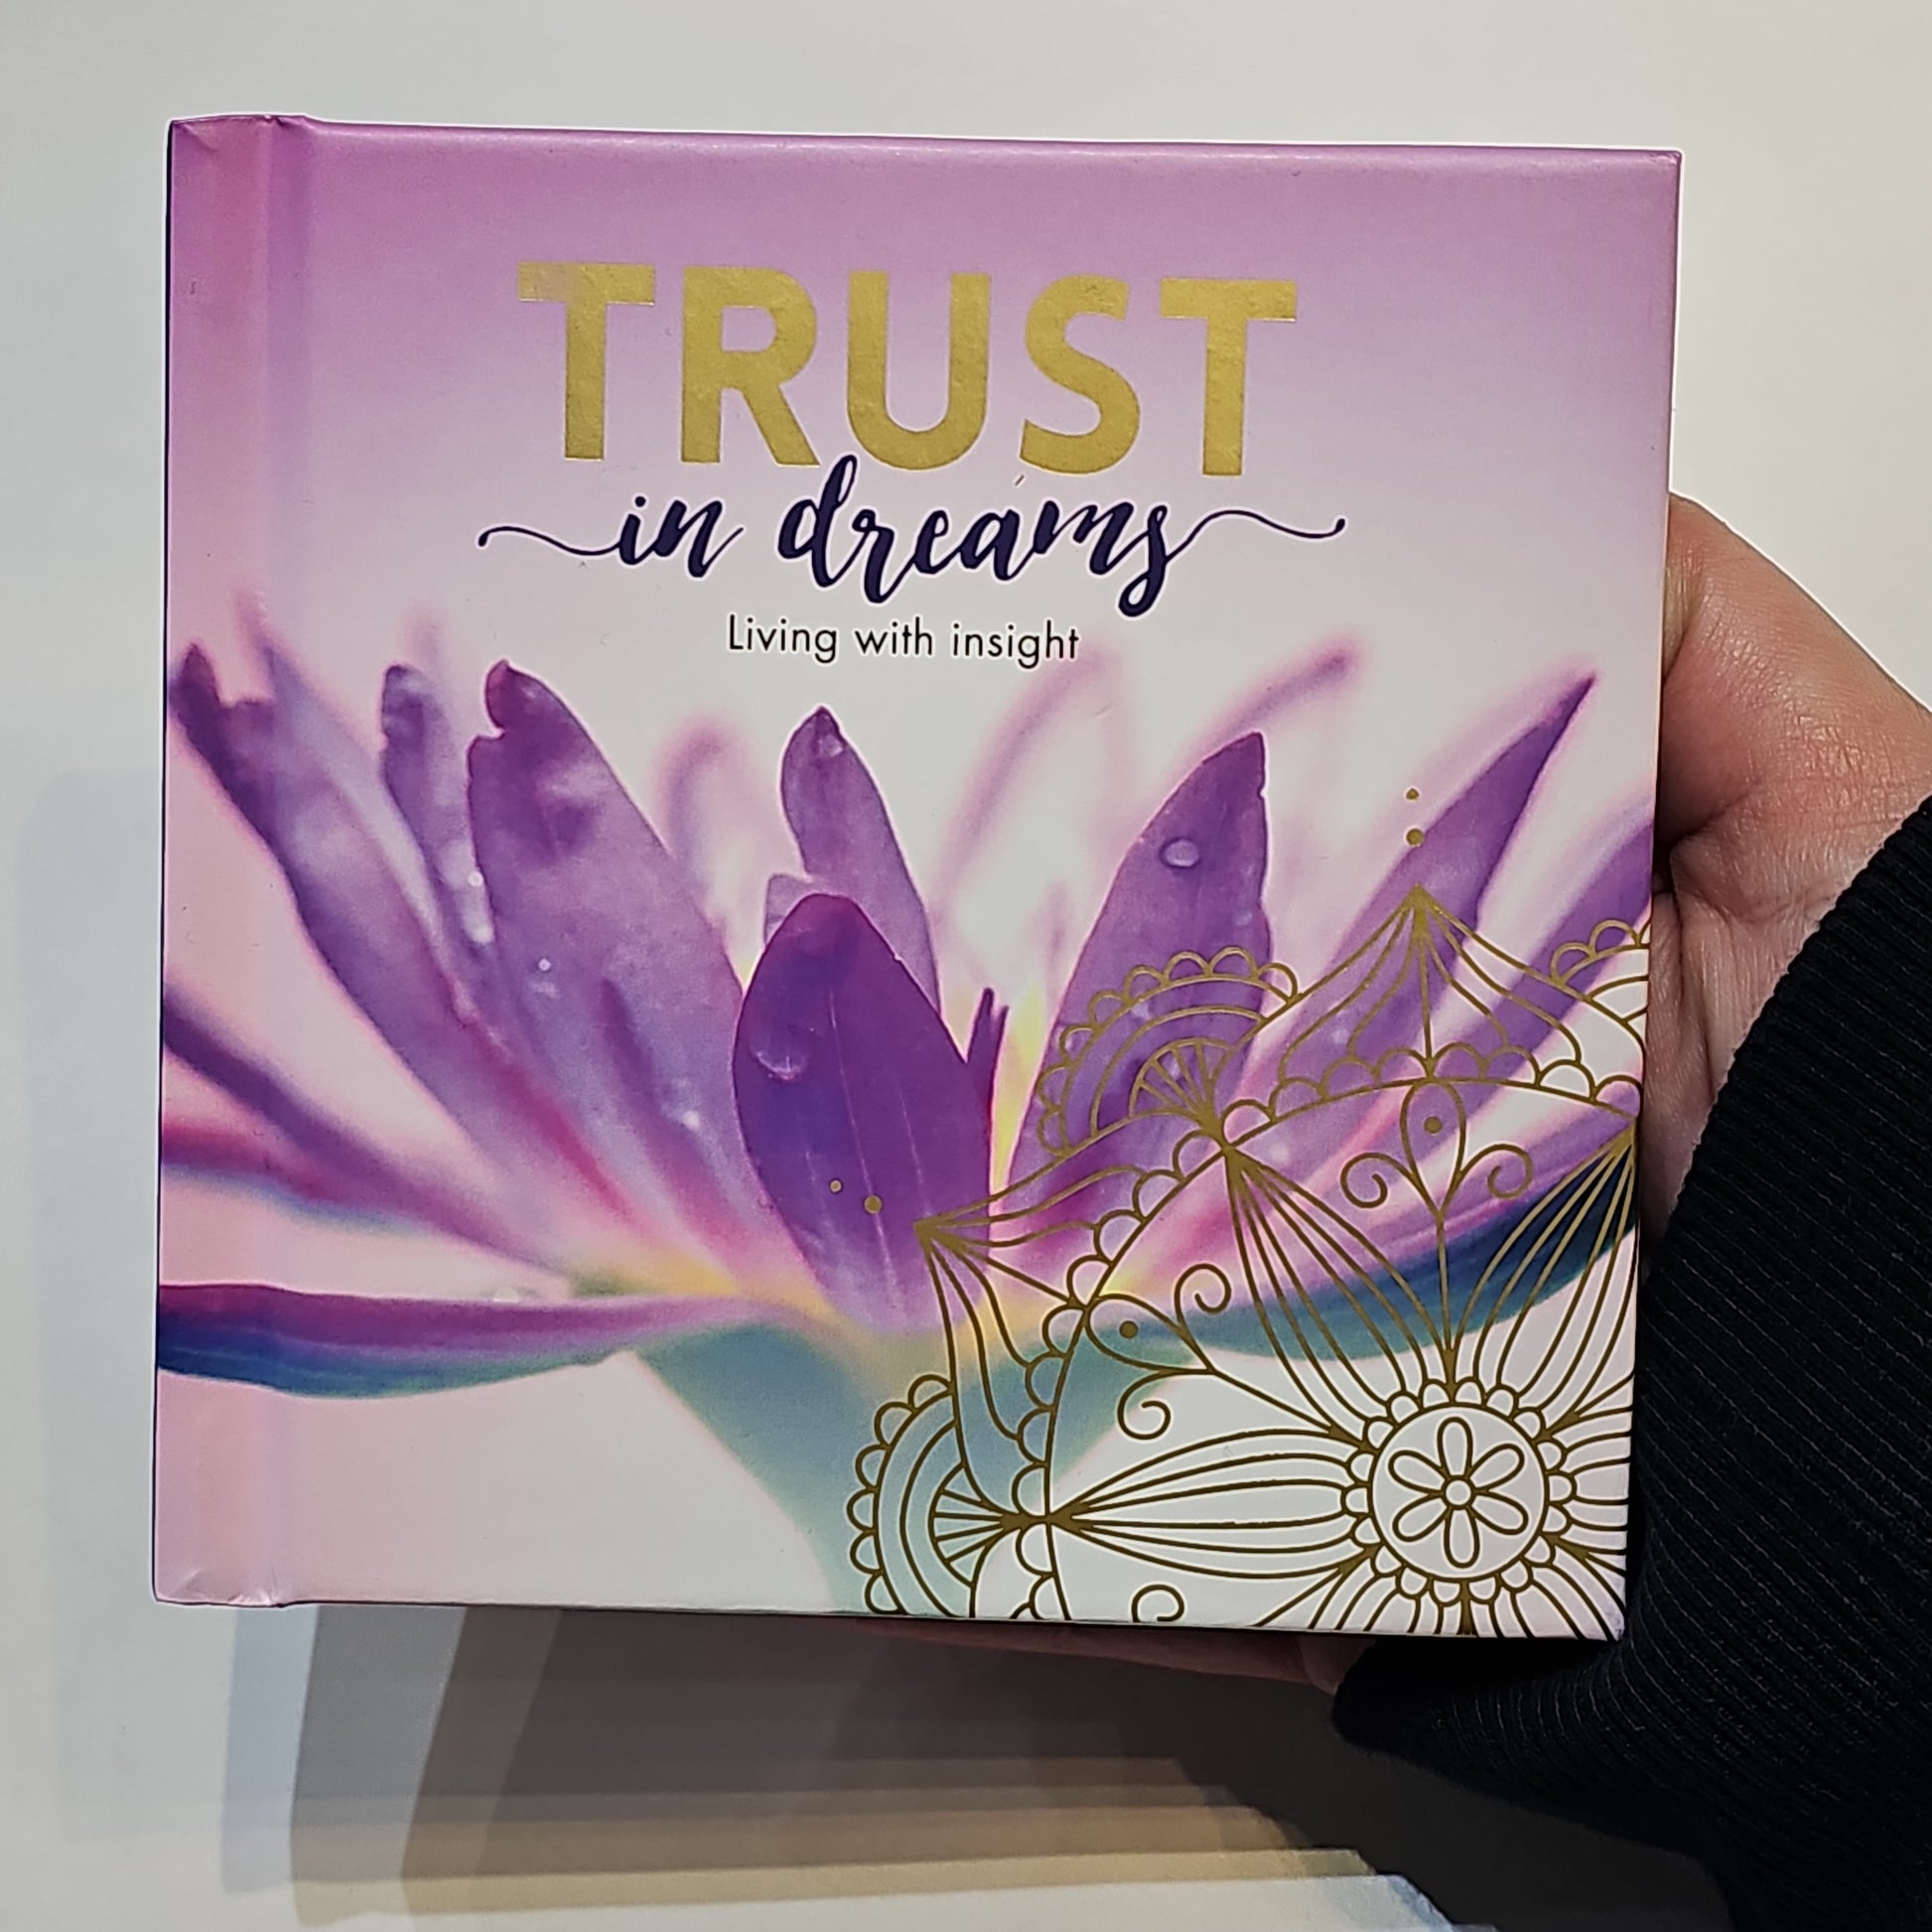 Trust in dreams - mindfulness book - Rivendell Shop